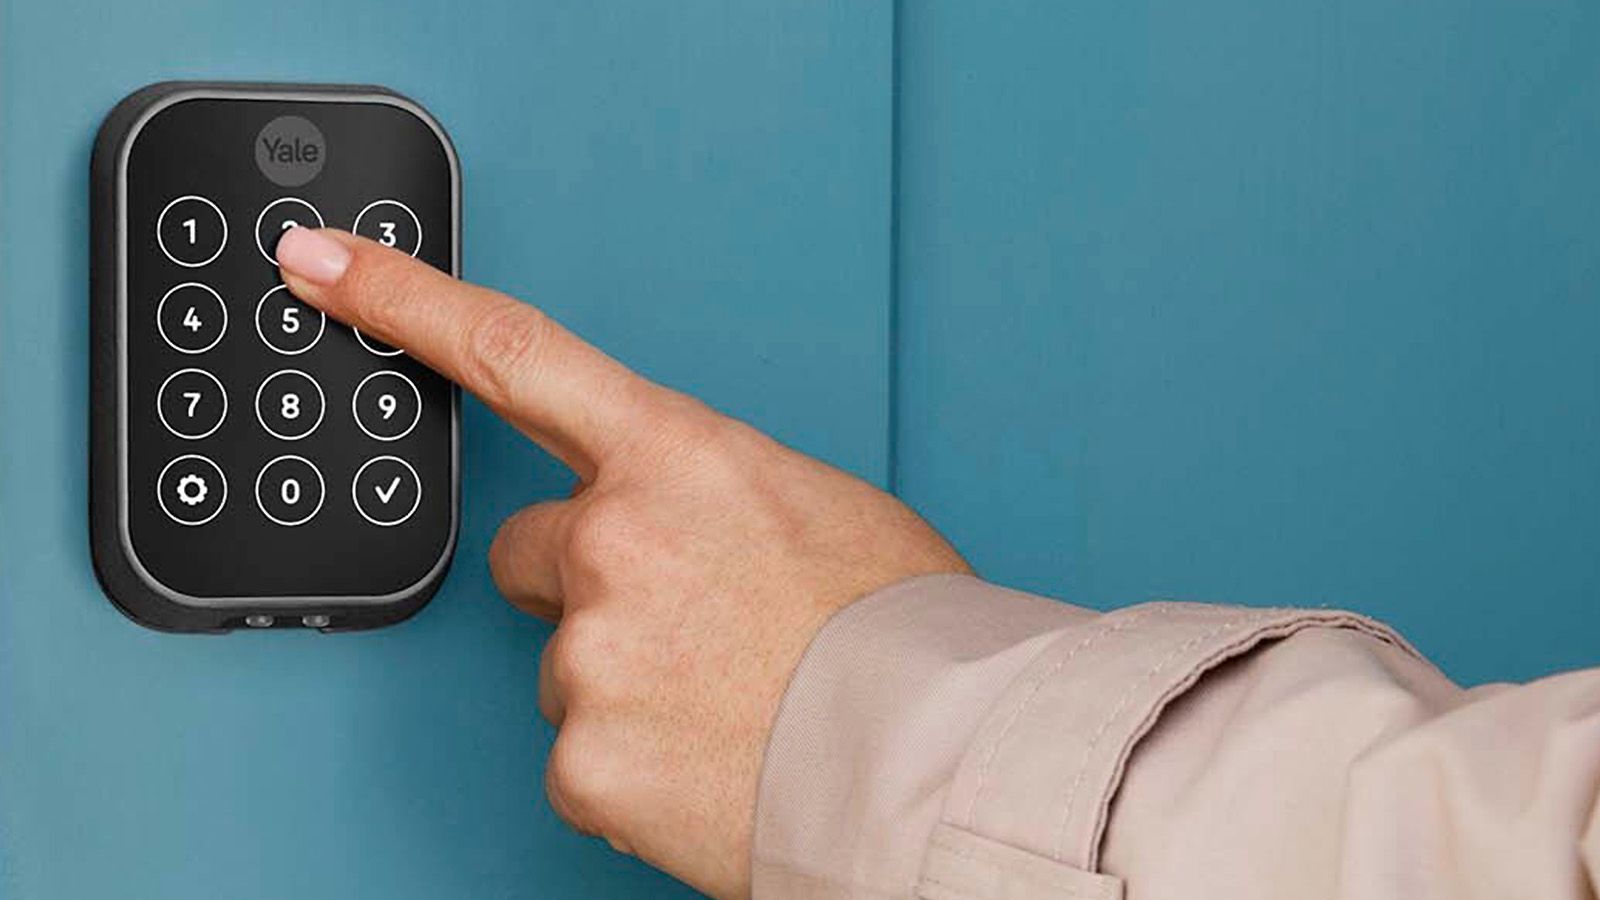 Meet the Yale Assure Lock® 2  Best Smart Lock for your Home